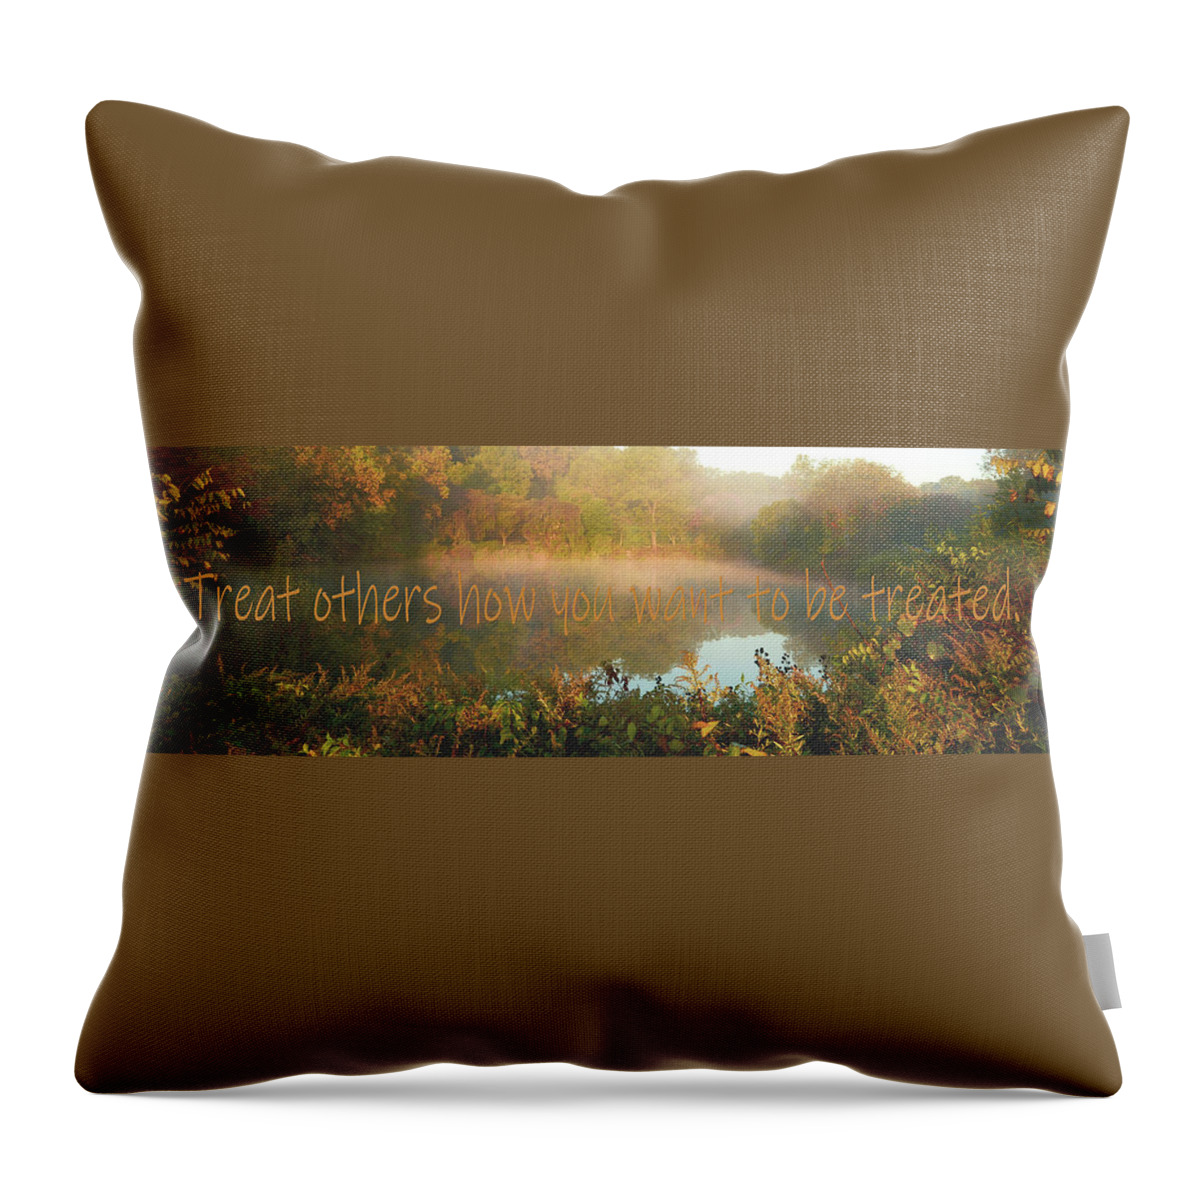 Quotes Throw Pillow featuring the digital art Treat others how you want to be treated. by Angie Tirado